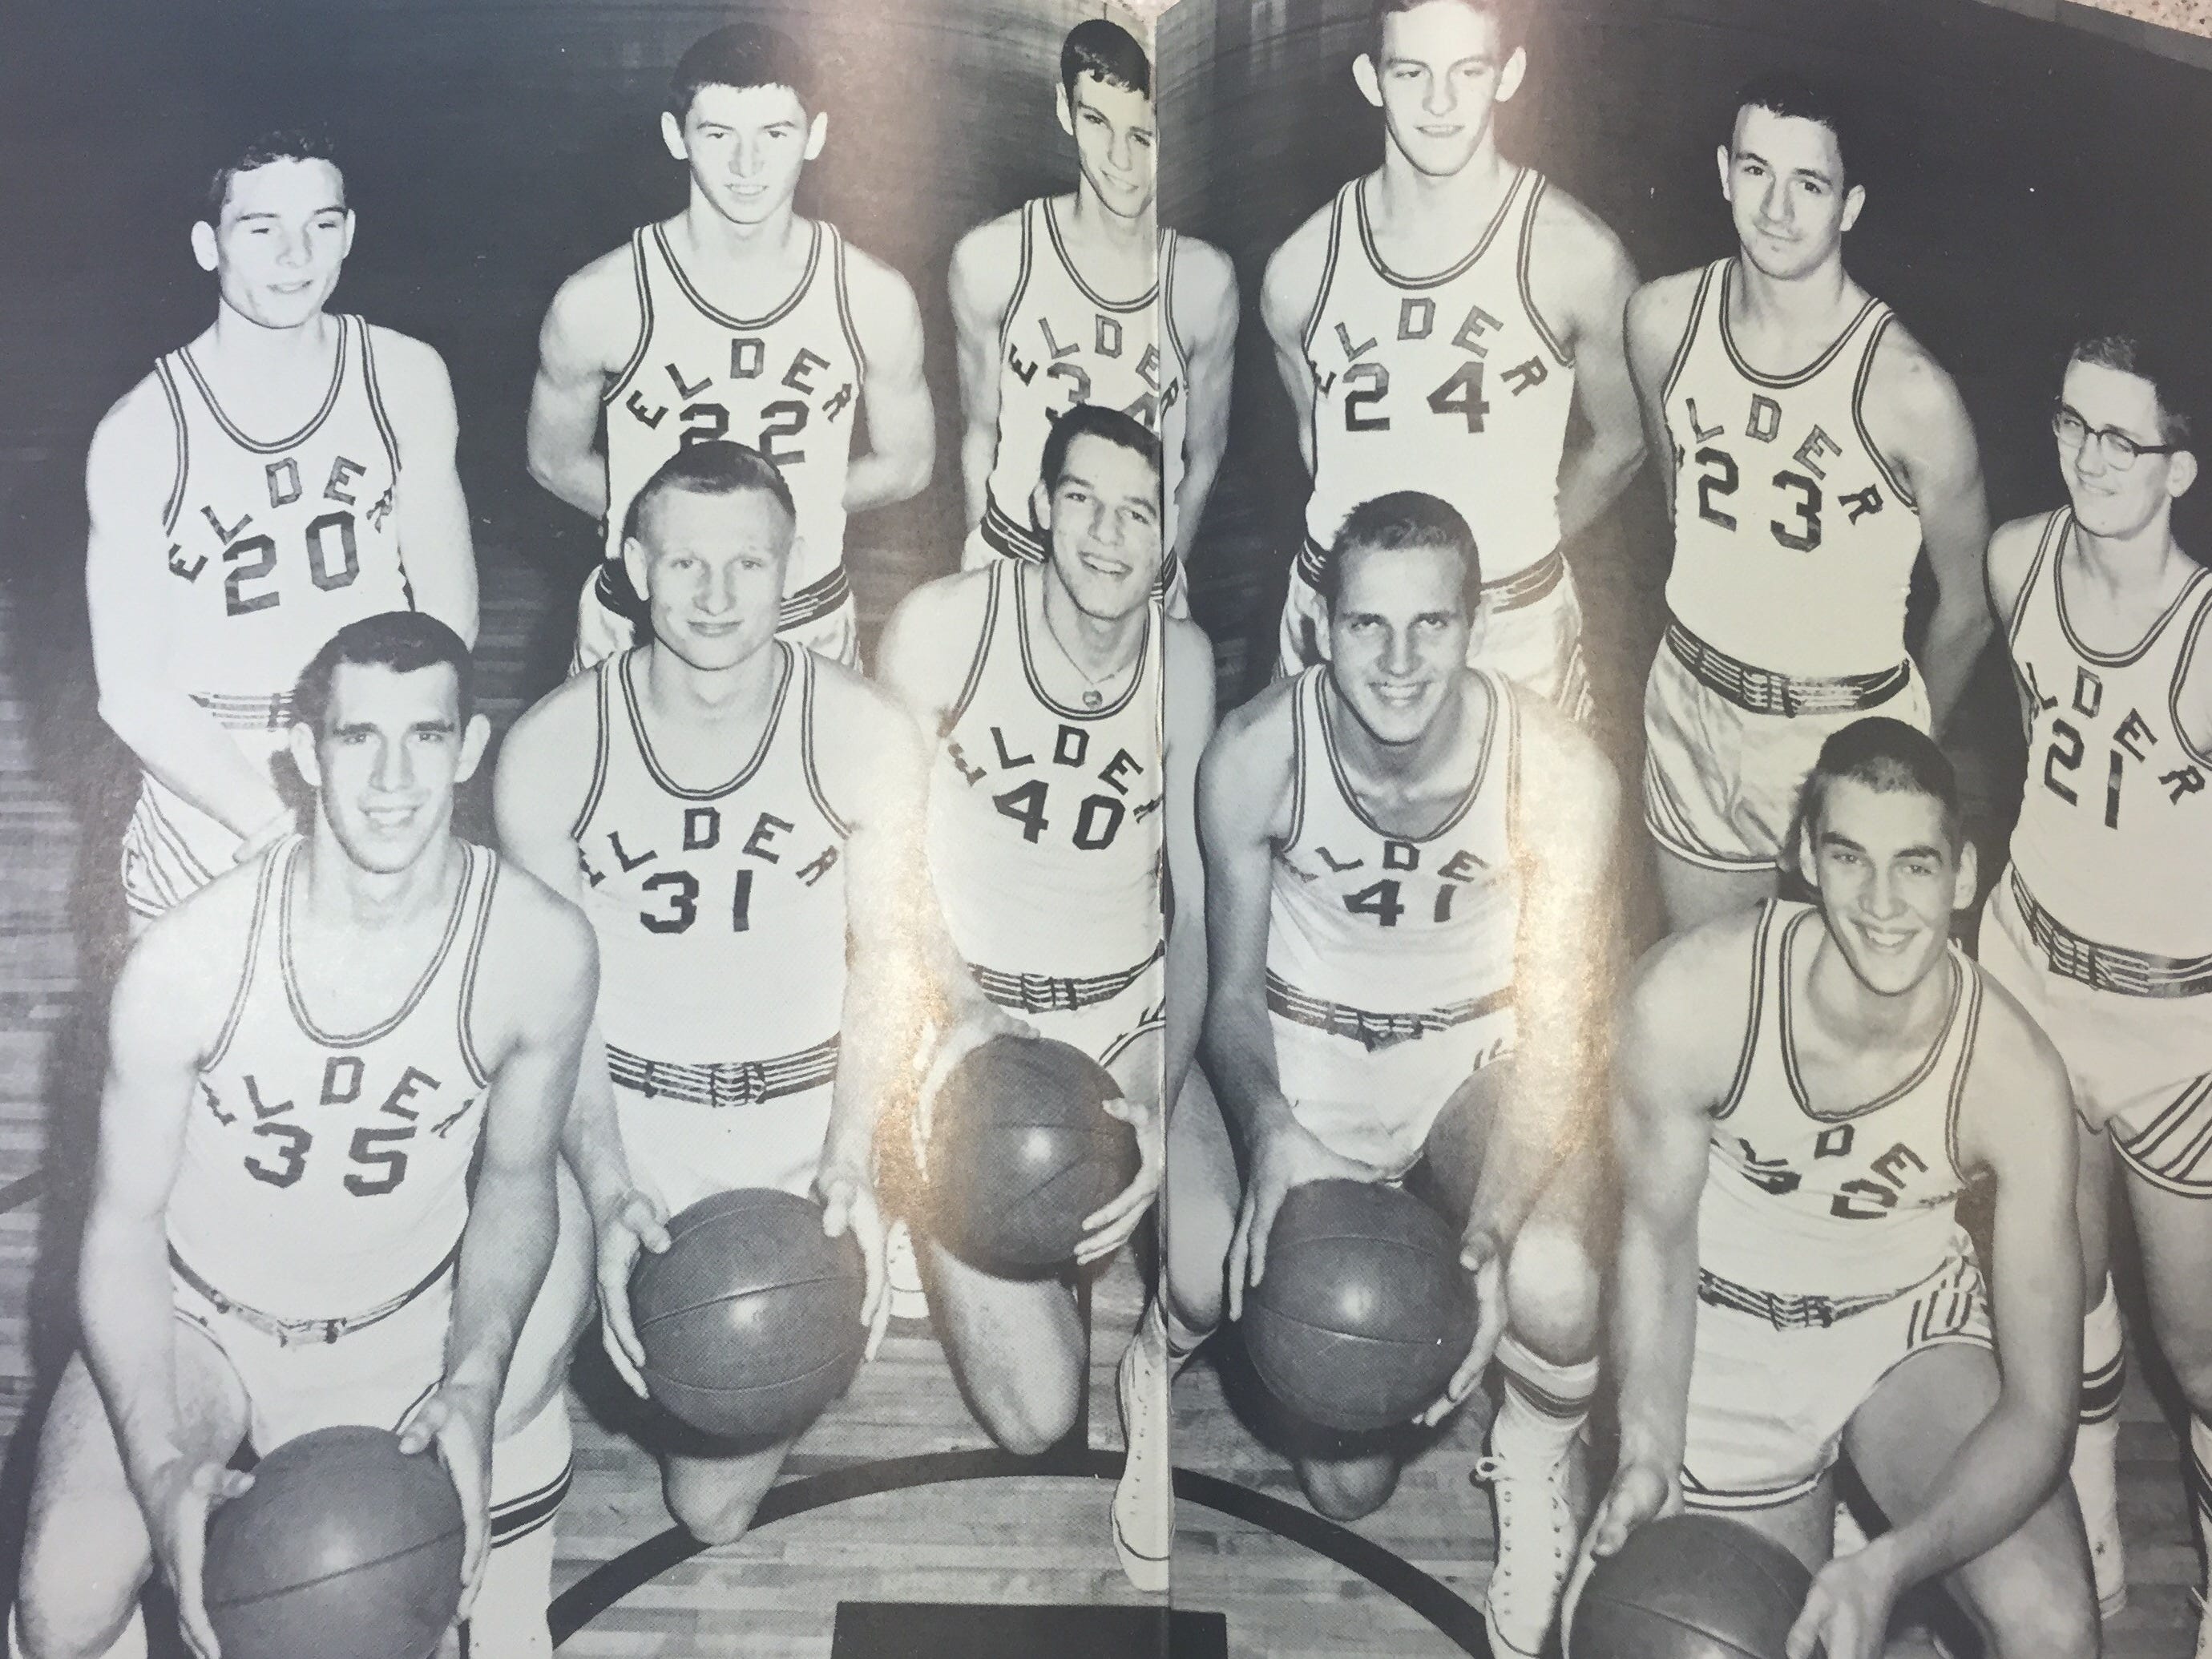 The 1961 Elder basketball team as shown in the yearbook.